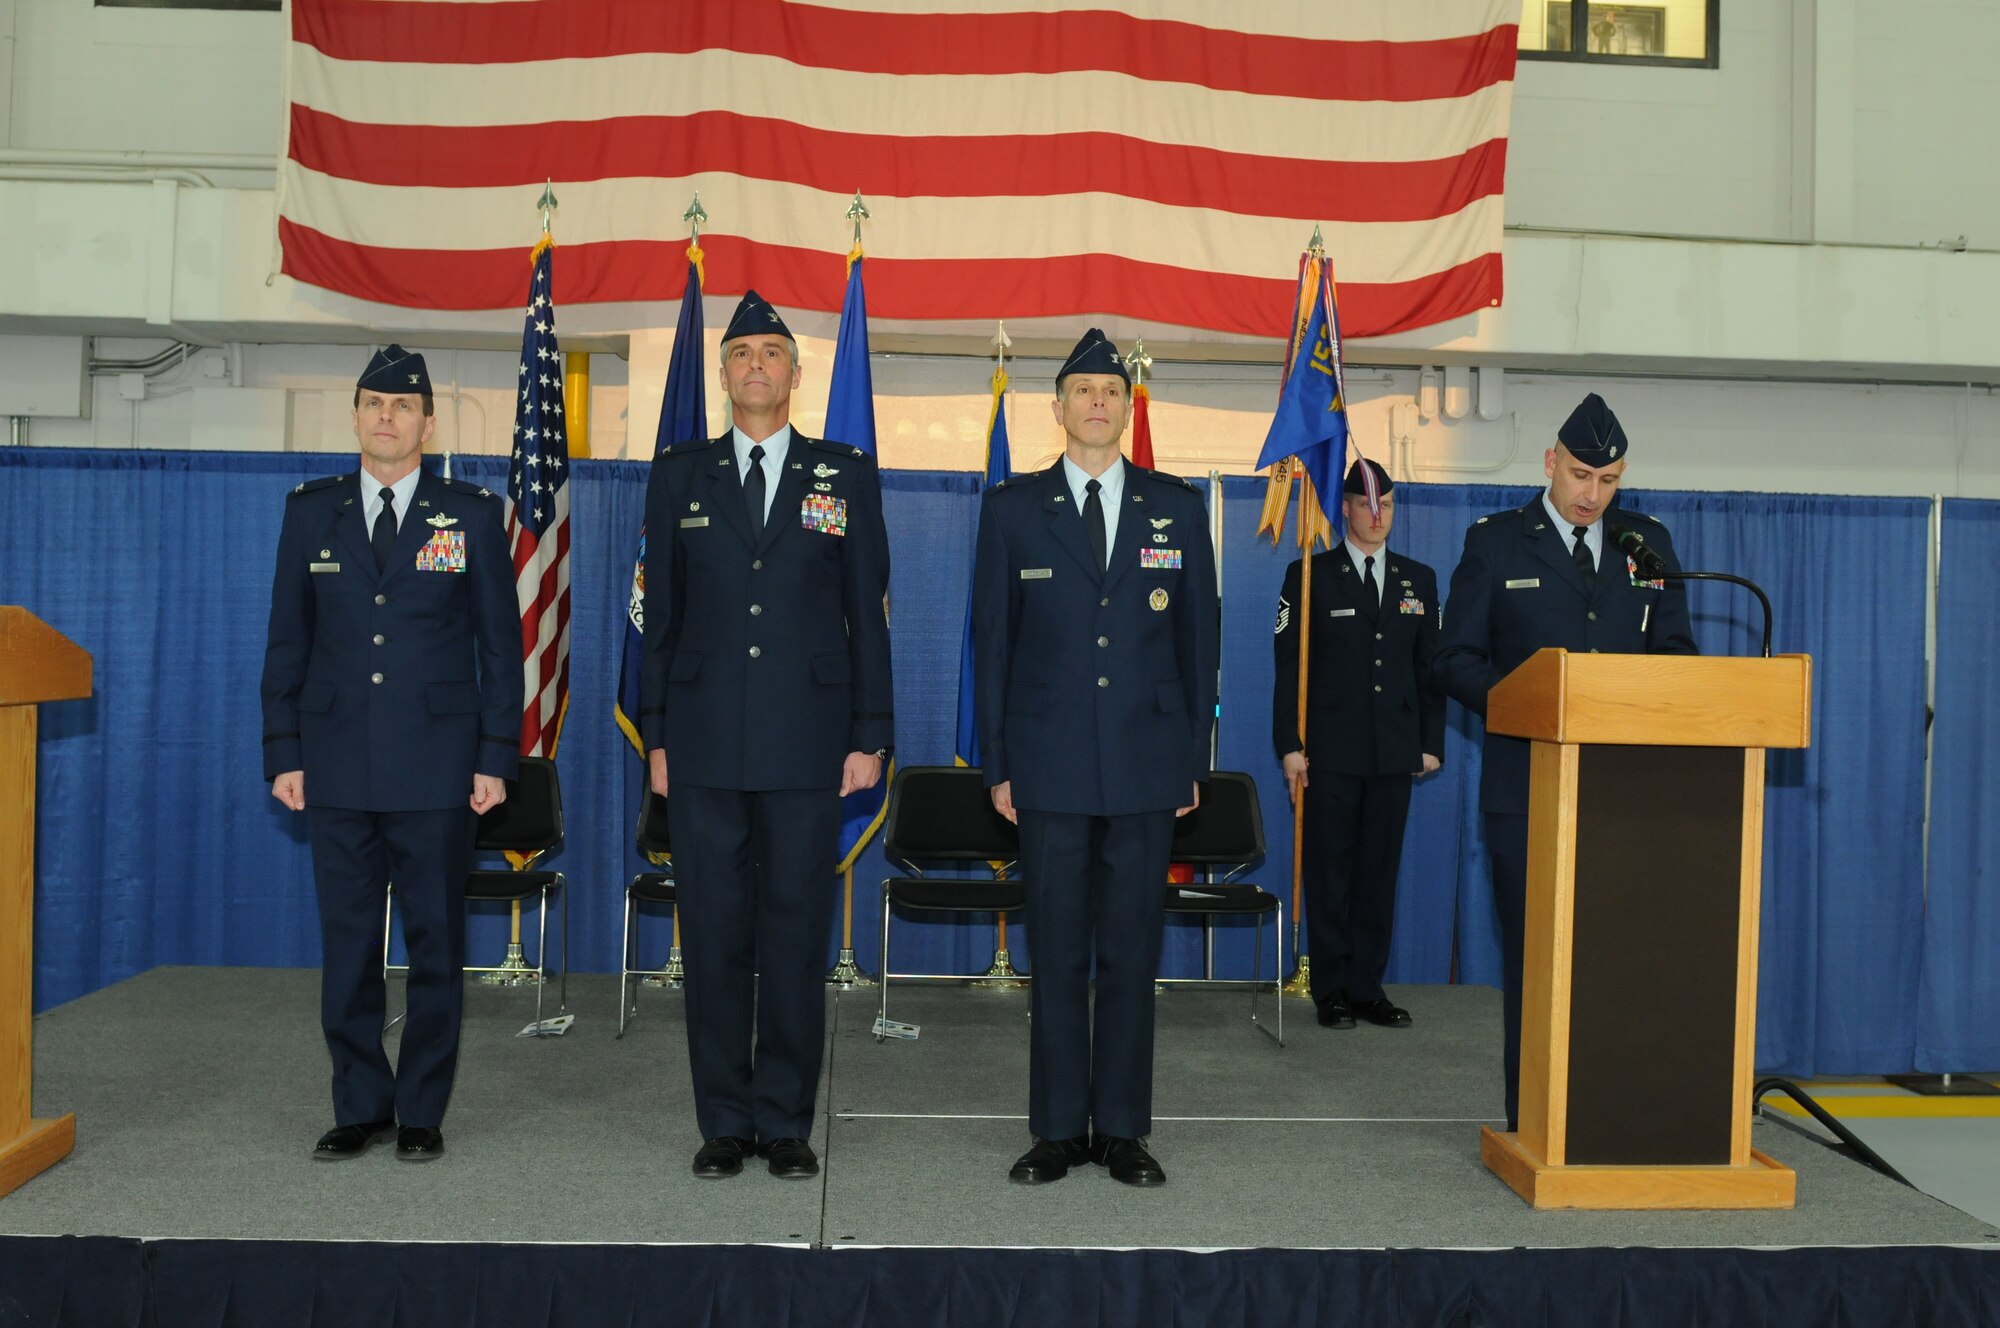 New York Air National Guard Col. Greg Semmel (left), Commander of the 174th Attack Wing, officiates the 152nd Air Operations Group's Change of Command ceremony held at Hancock Field Air National Guard Base, Syracuse, New York on 6 April, 2013.  During the ceremony, Col. Mark Murphy (second from left) turned over command to Col. Michael Comella. (New York Air National Guard photo by Tech. Sgt. Justin A., Huett/Released)
